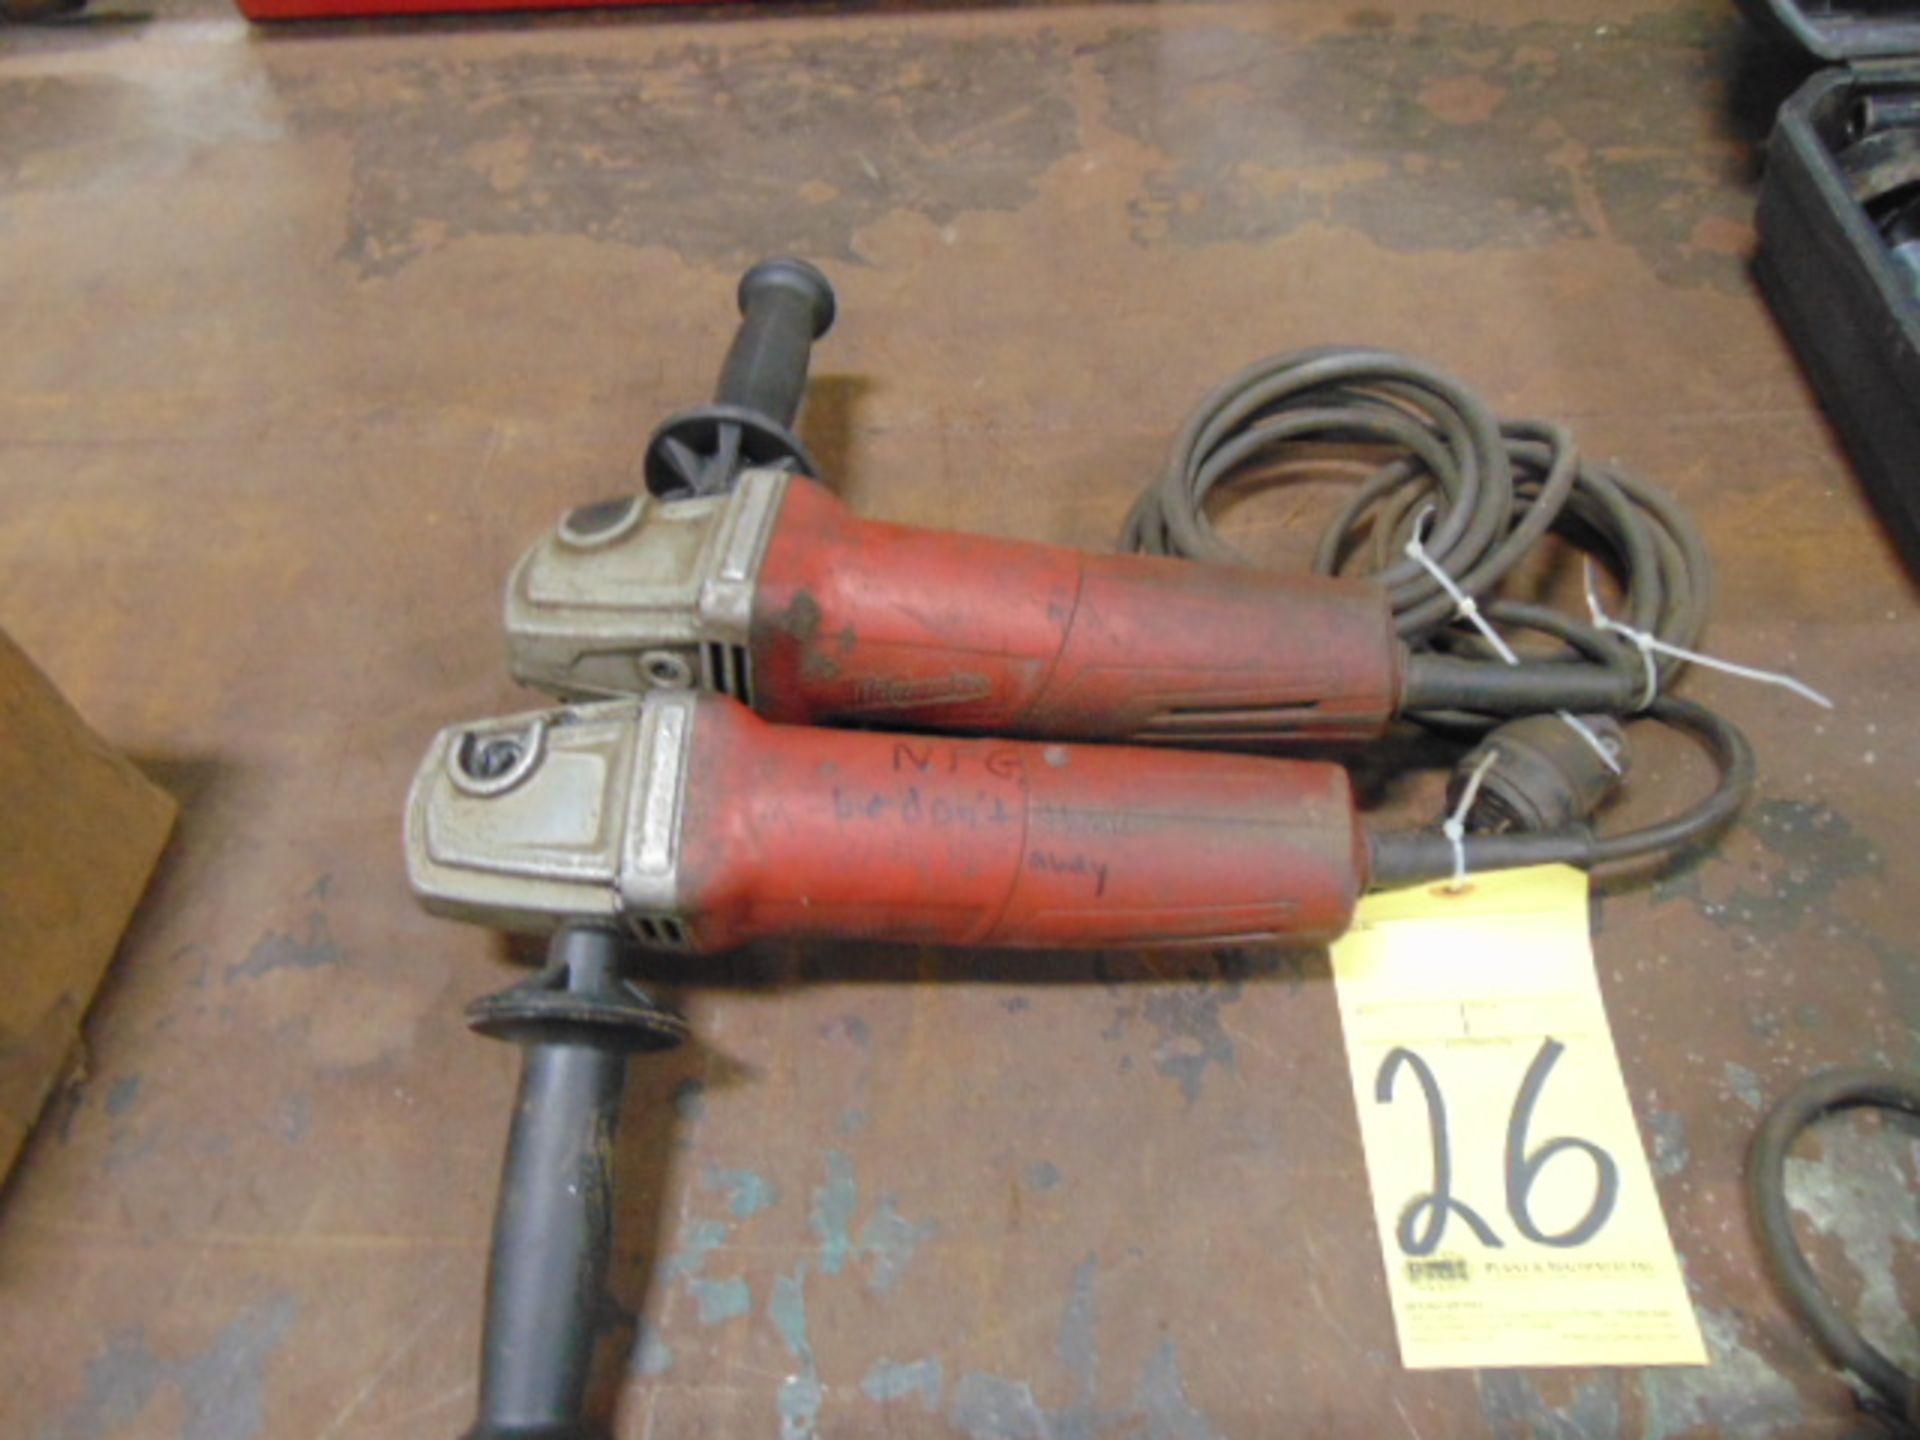 LOT OF RIGHT ANGLE GRINDERS (2), MILWAUKEE 4-1/2"